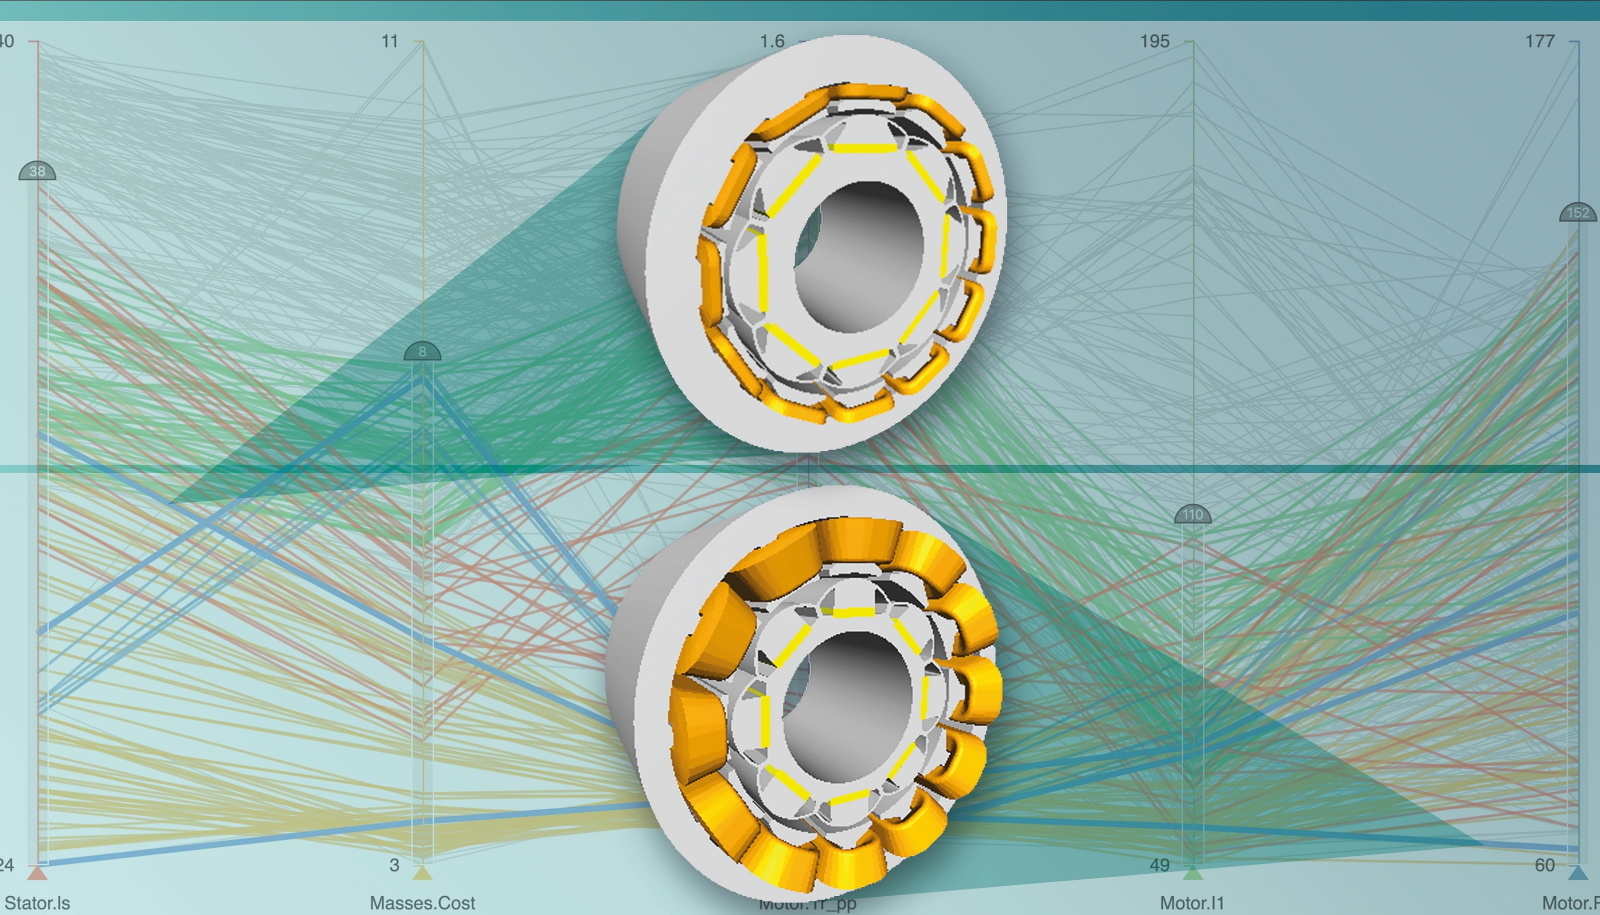 While the visualization software was developed specifically for the design of an electric motor, it can also be used to optimize nearly any other complex system or project.